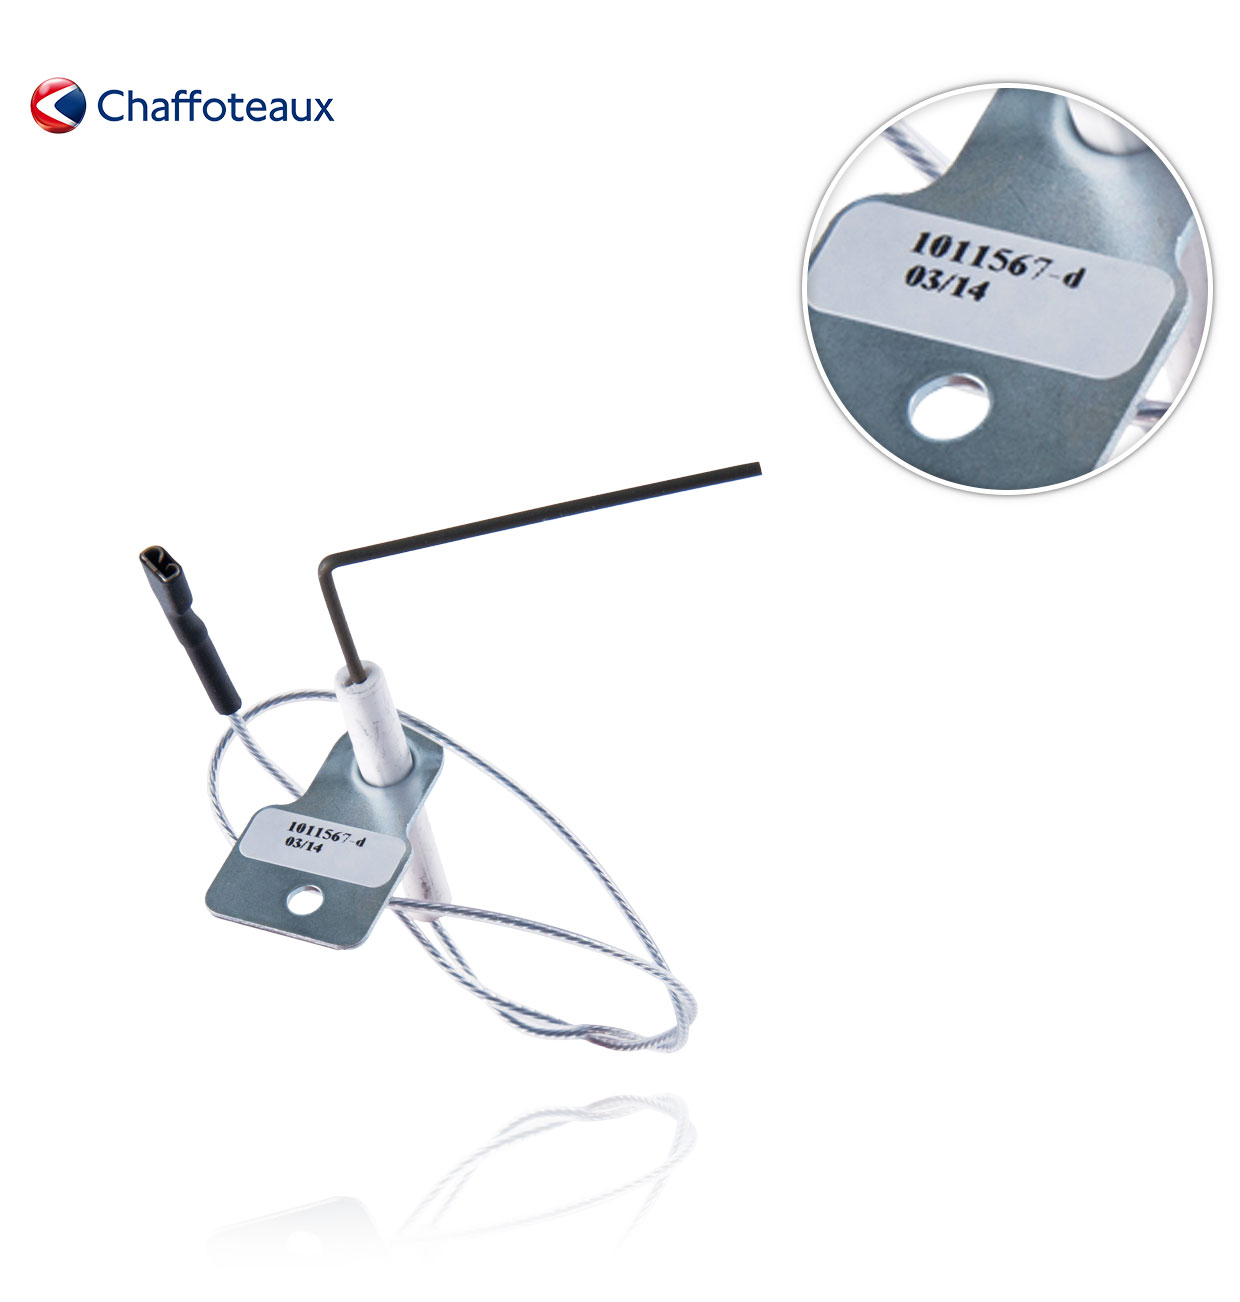 CHAFFOTEAUX 61011567 IONISATION ELECTRODE